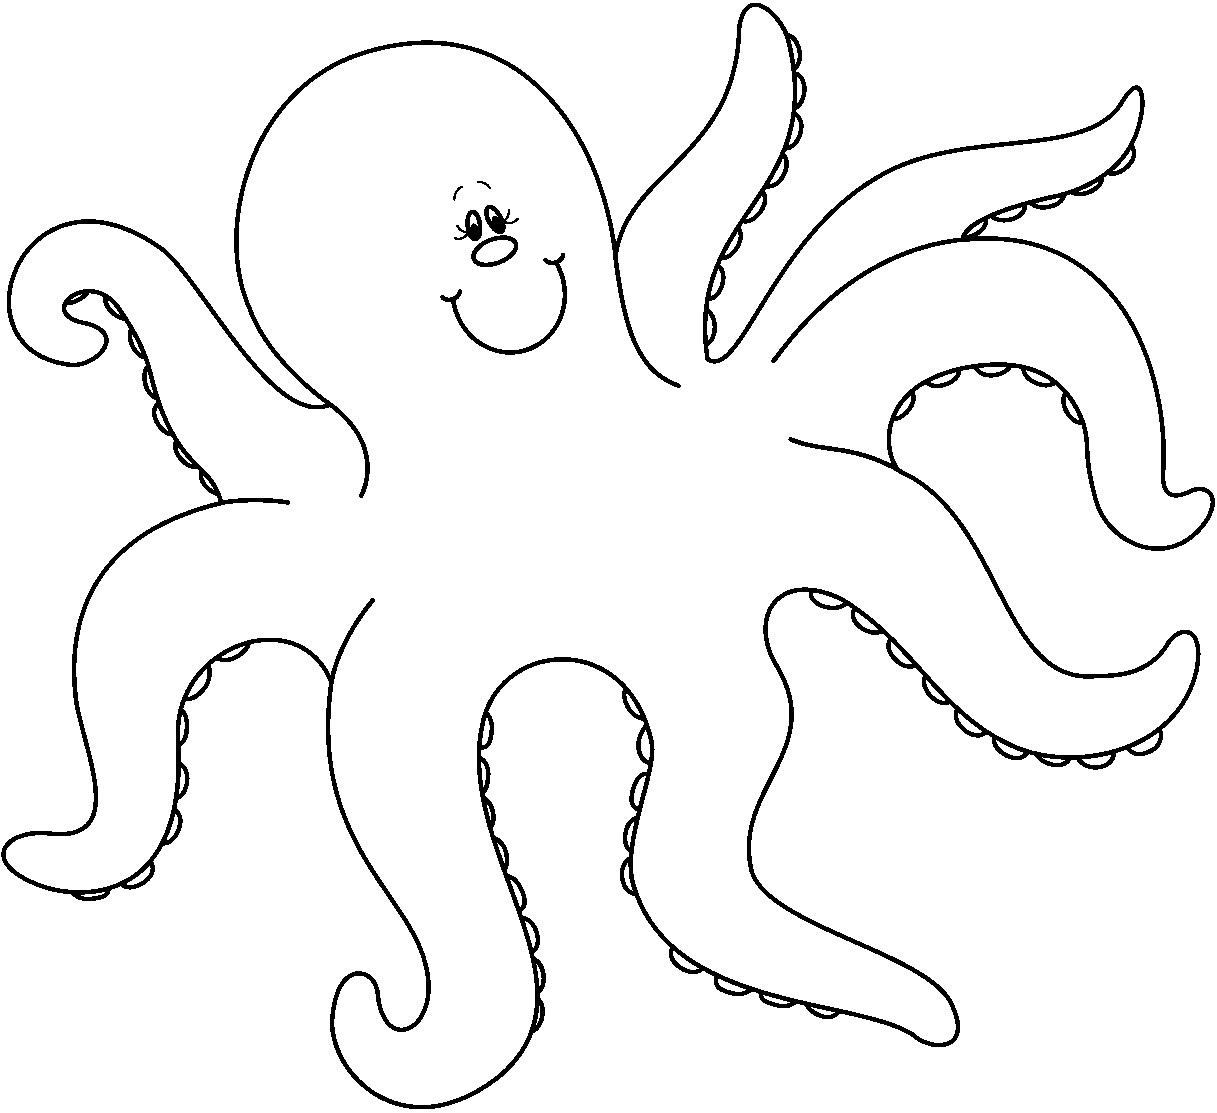 Octopus Silhouette Octopus Images Stock Photos Clipart